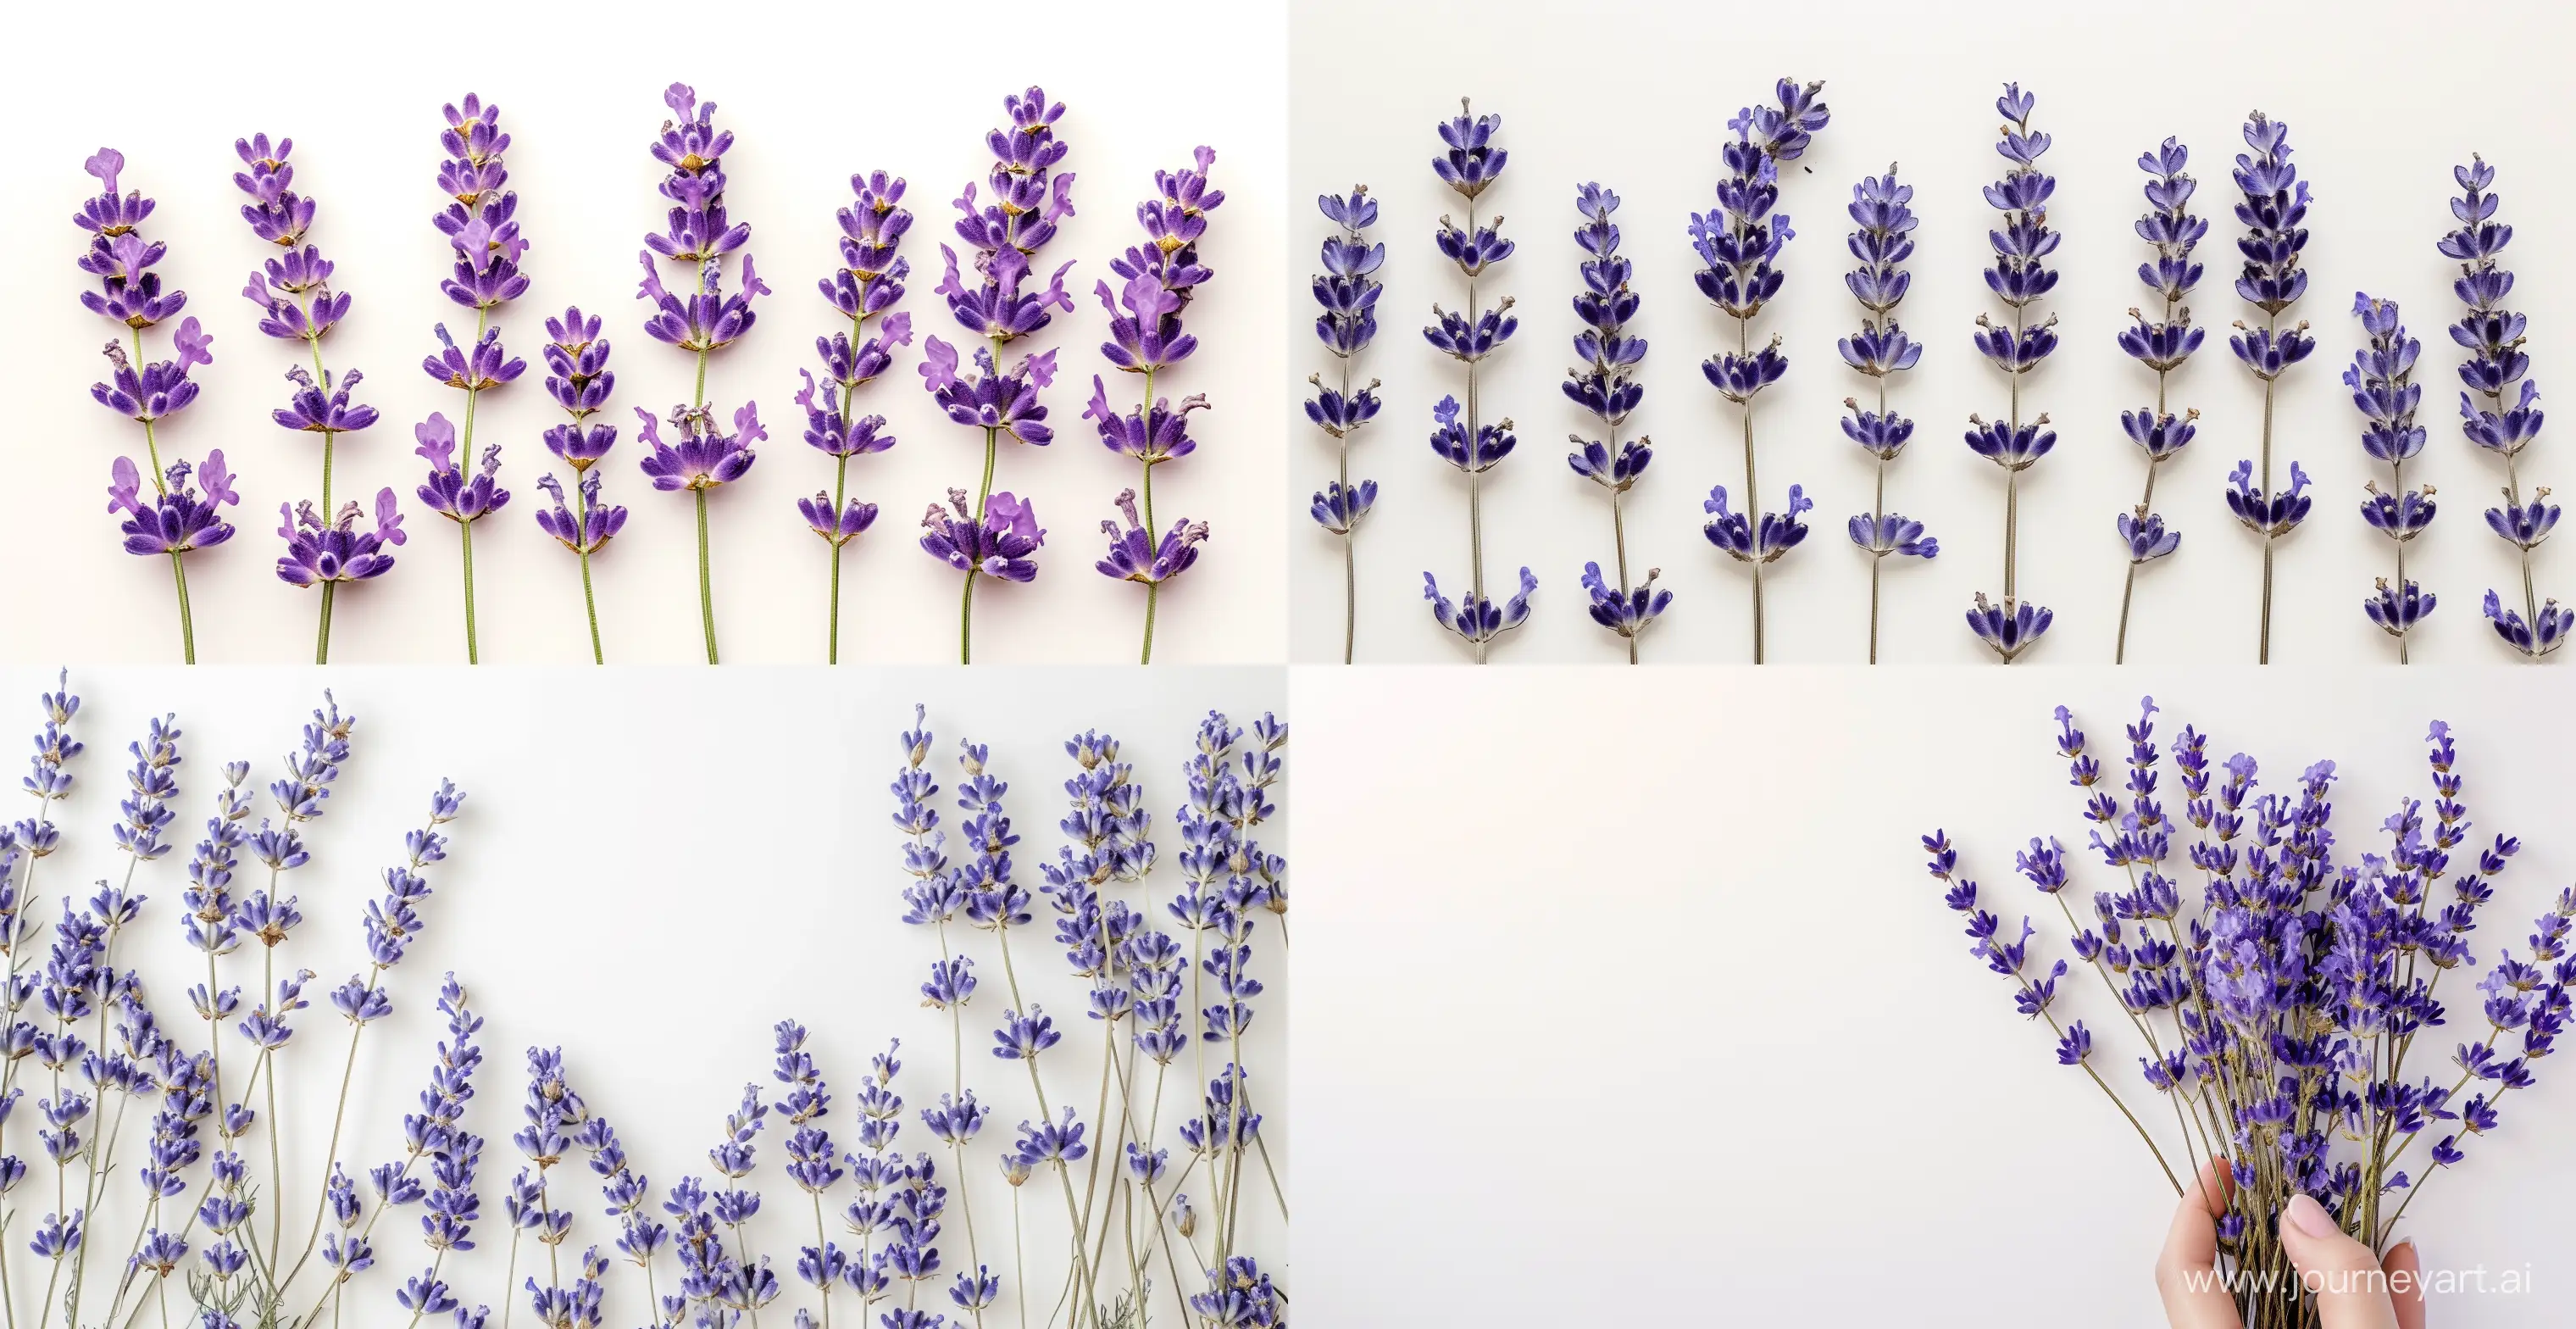 lavender pressed dried flowers in the style of watercolor on a white background --ar 293:151